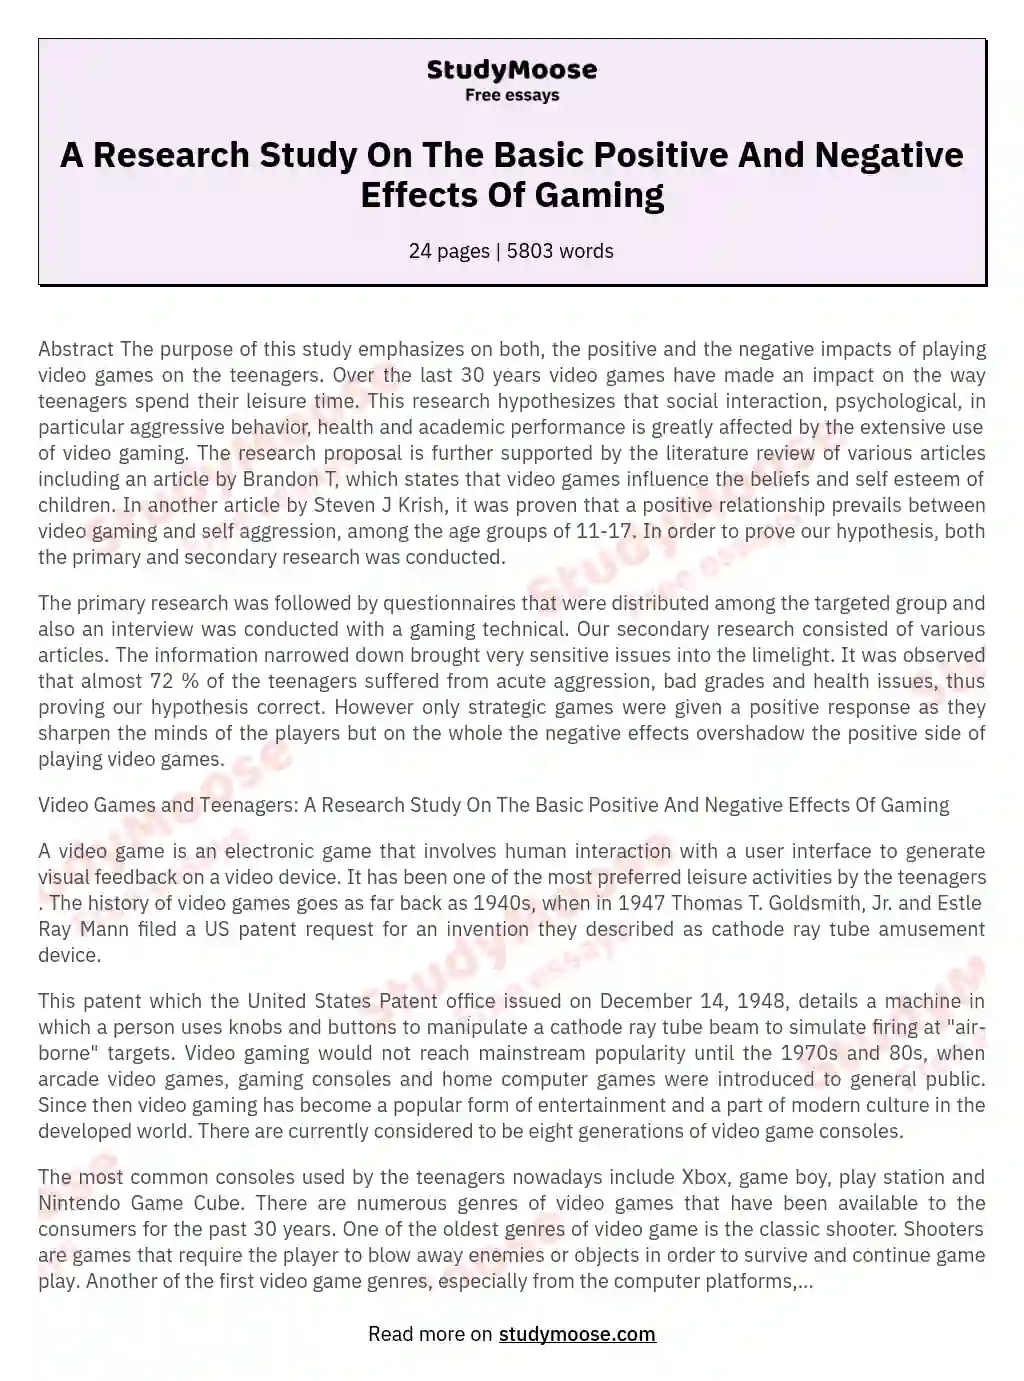 A Research Study On The Basic Positive And Negative Effects Of Gaming